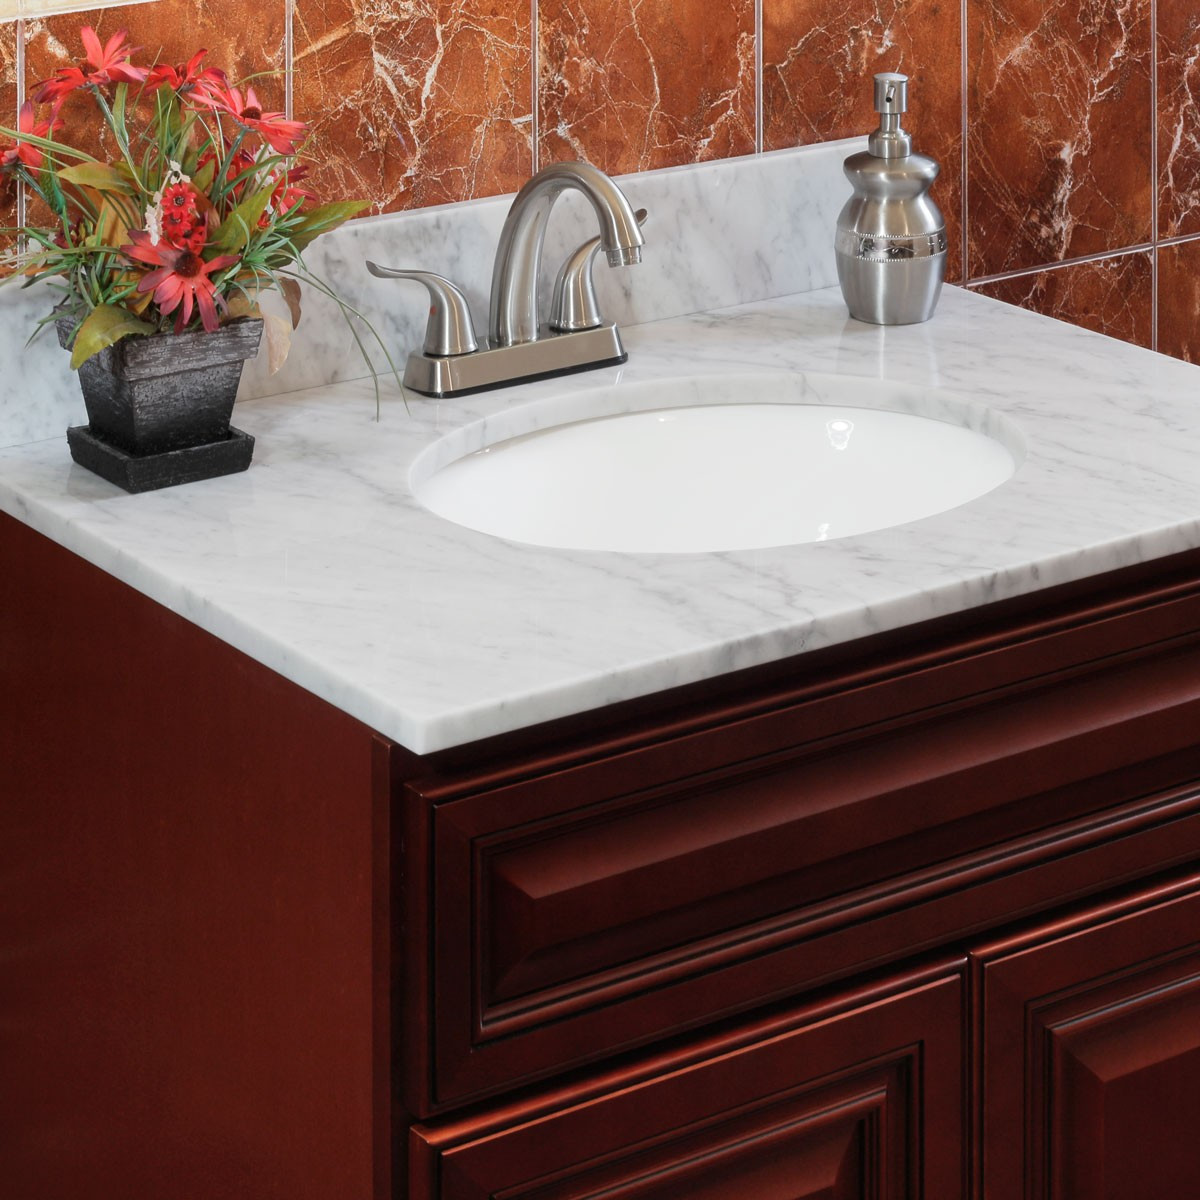 Bathroom Vanity Cabinets With Tops
 Natural Marble Vanity Tops by LessCare Shop Bathroom